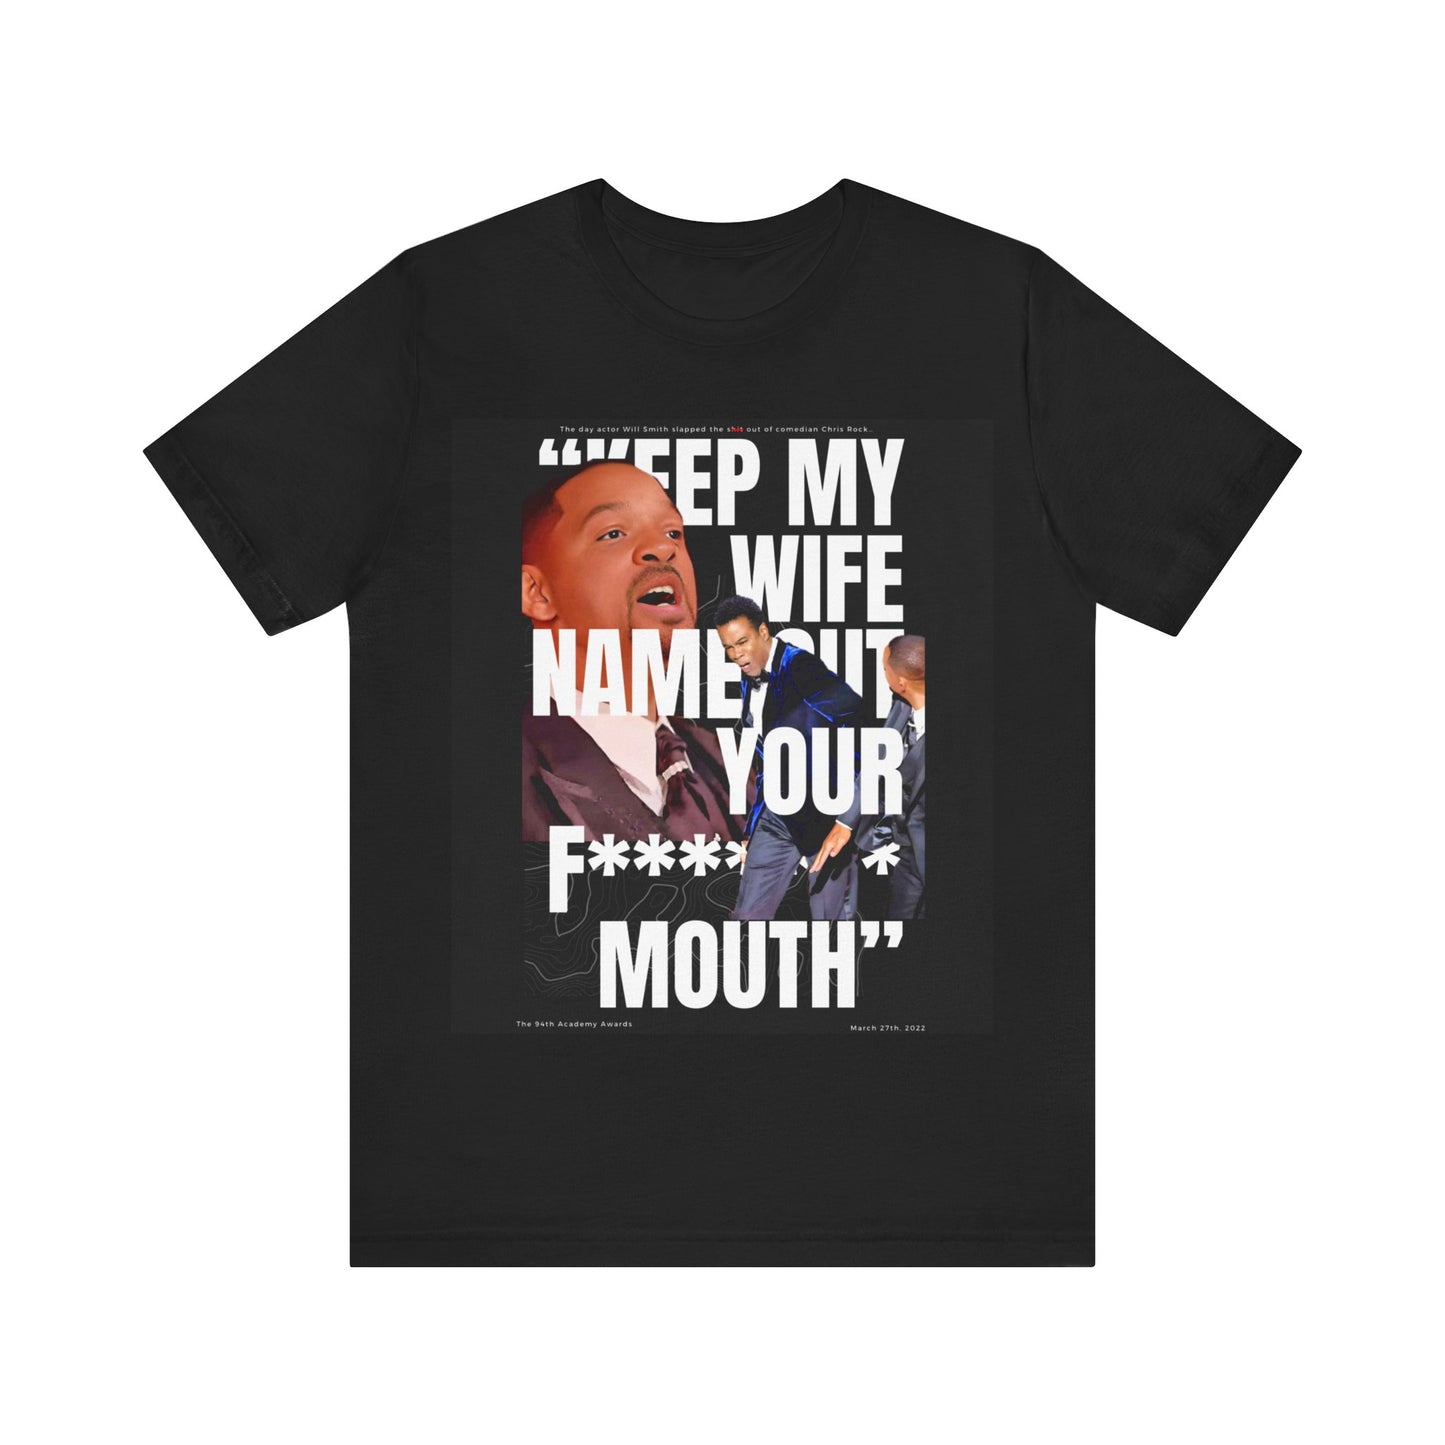 Will Smith “Keep my wife name out your mouth” Tee